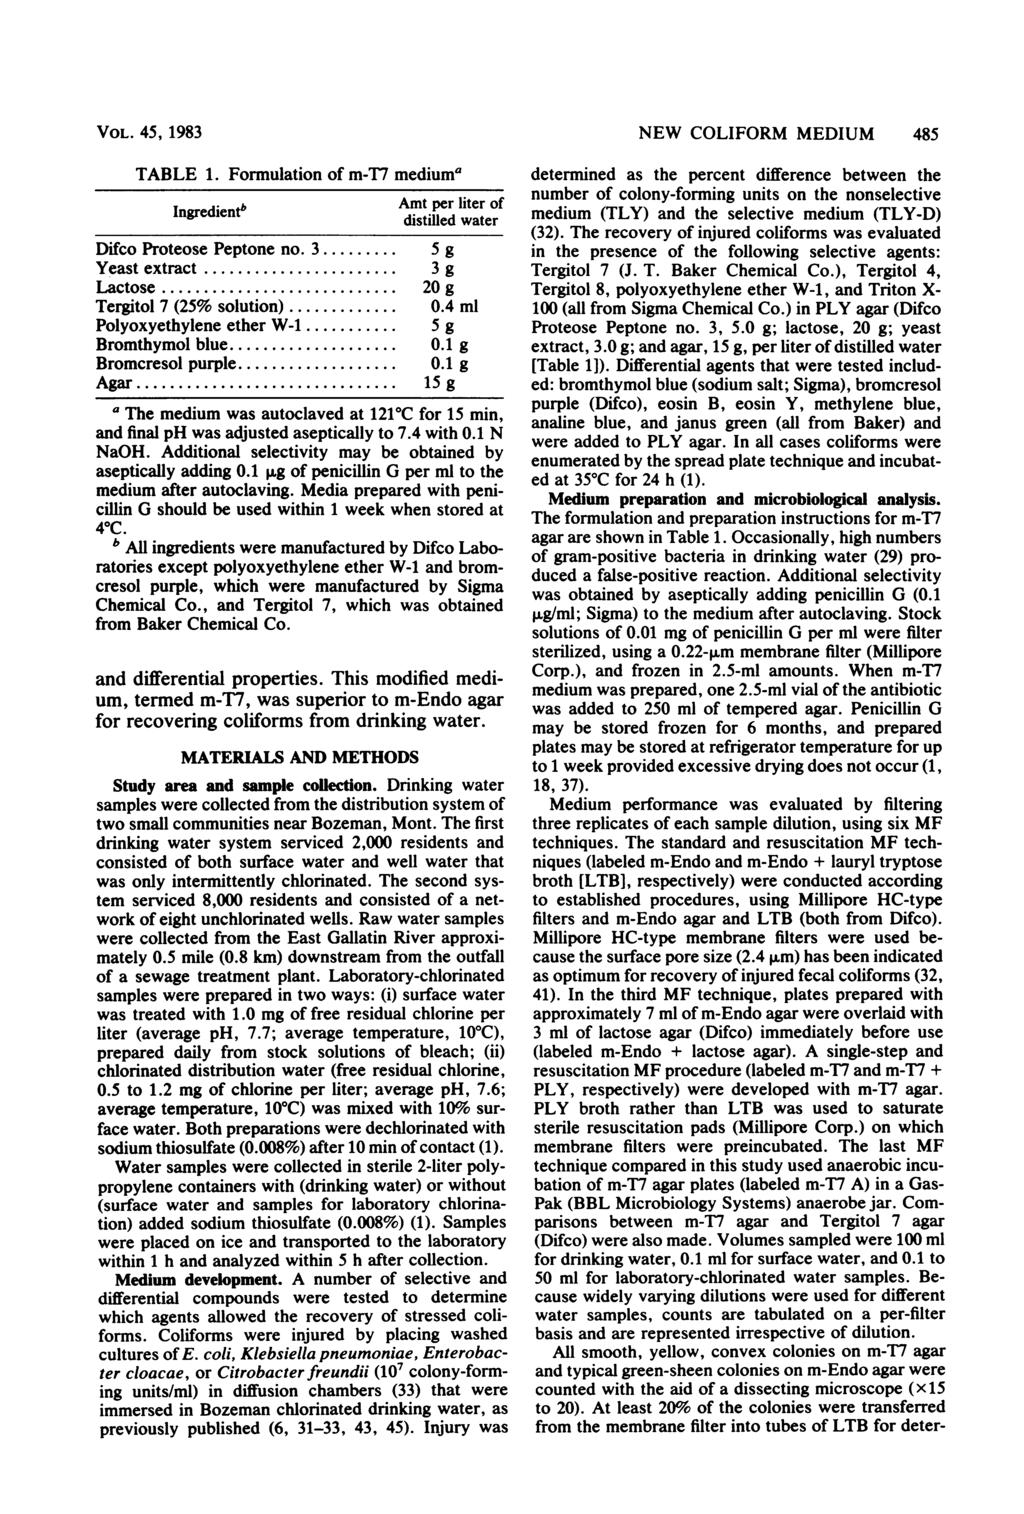 VOL. 45, 1983 TABLE 1. Formulation of m-t7 mediuma Ingredientb Amt distilled per liter water of Difco Proteose Peptone no. 3... 5 g Yeast extract... 3 g Lactose...... 2 g Tergitol 7 (25% solution).